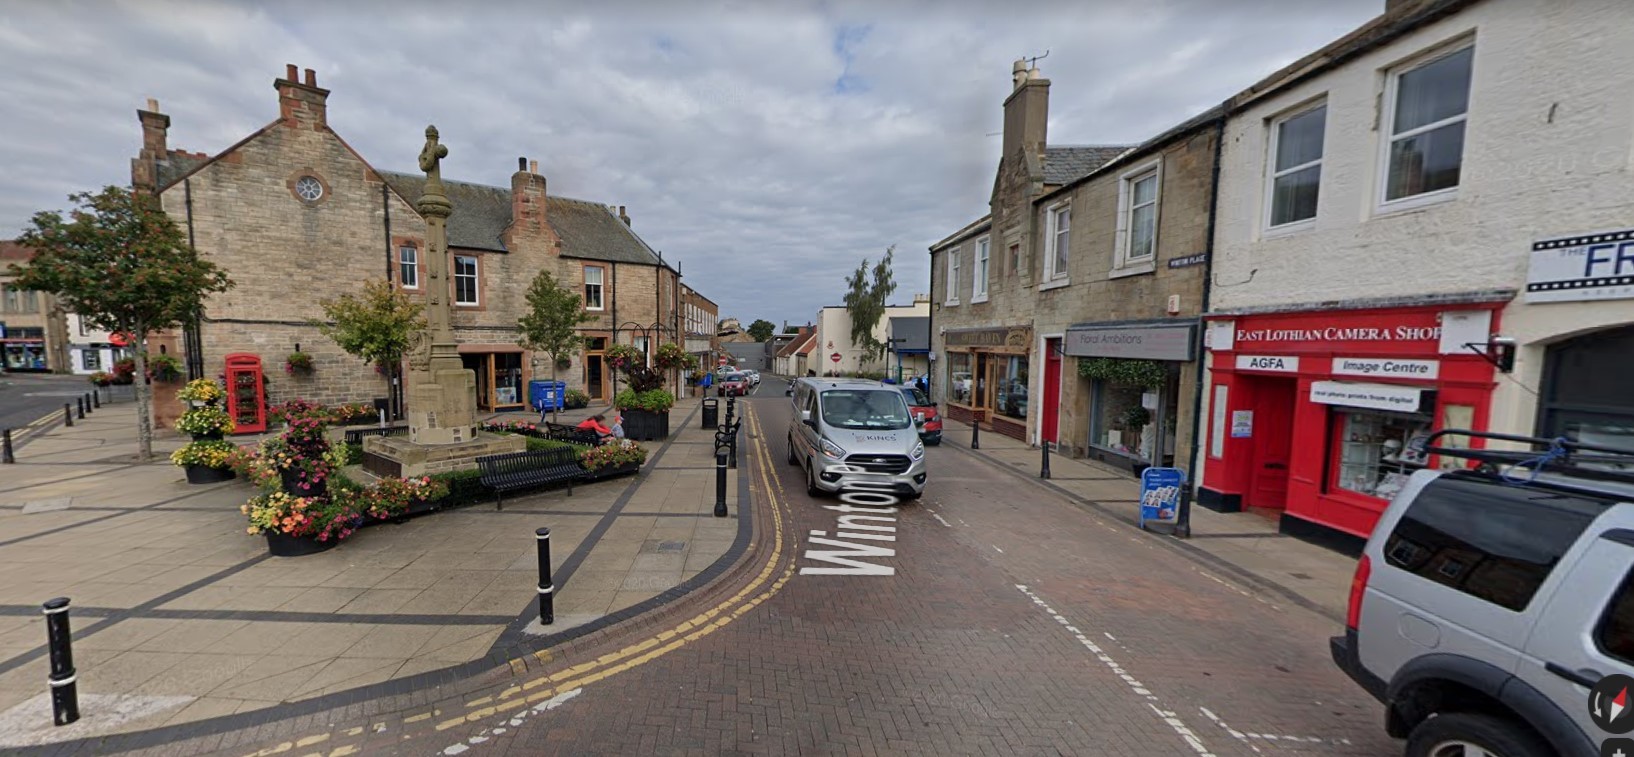 Youth organisation Recharge has received good news after plans to transform a building in Tranent town centre were given the go ahead. Picture: Google Maps